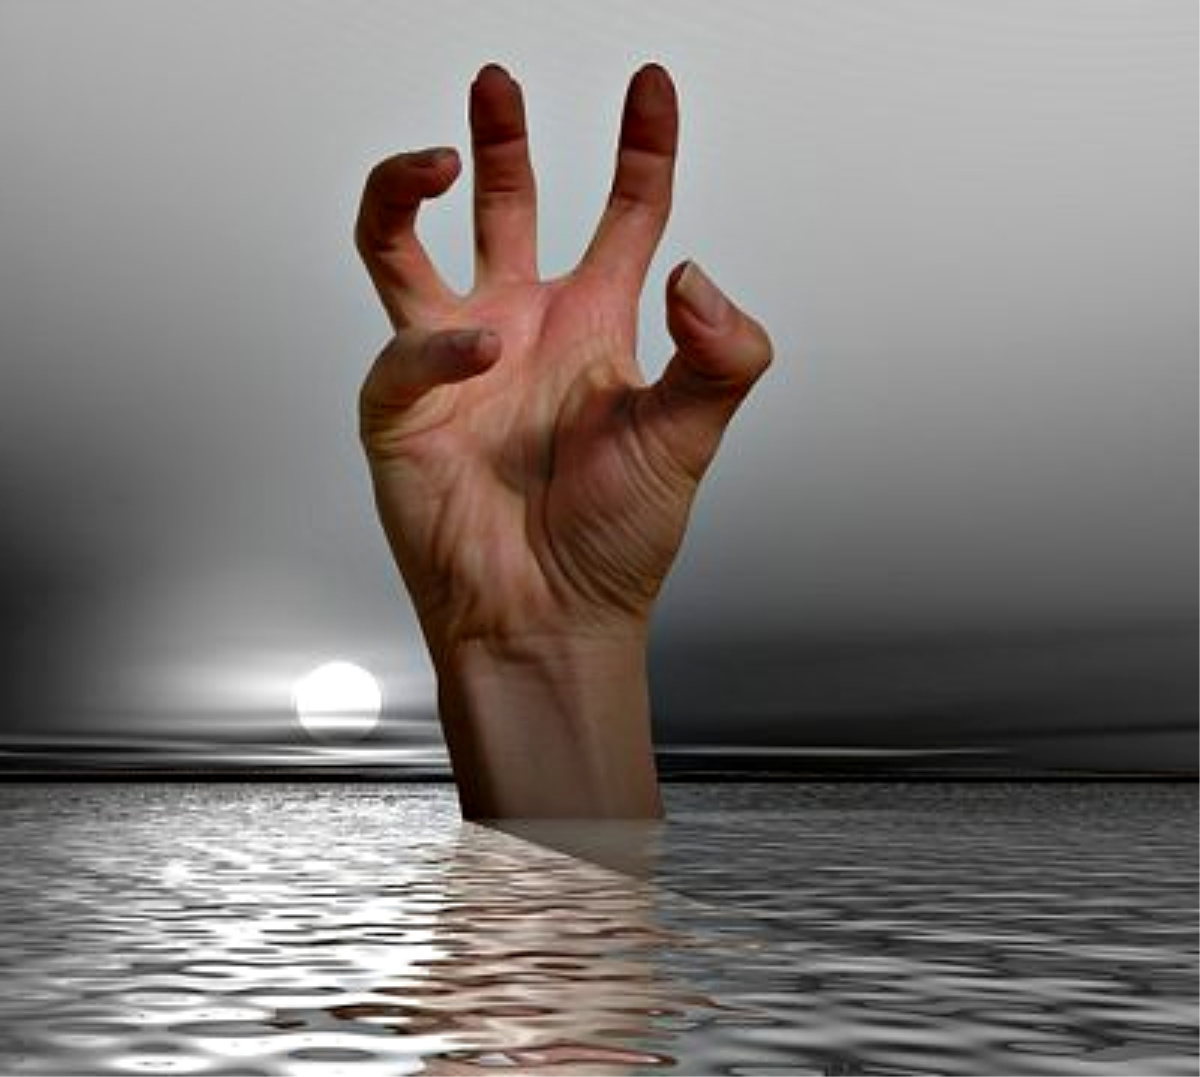 Stressed hand rising out of water